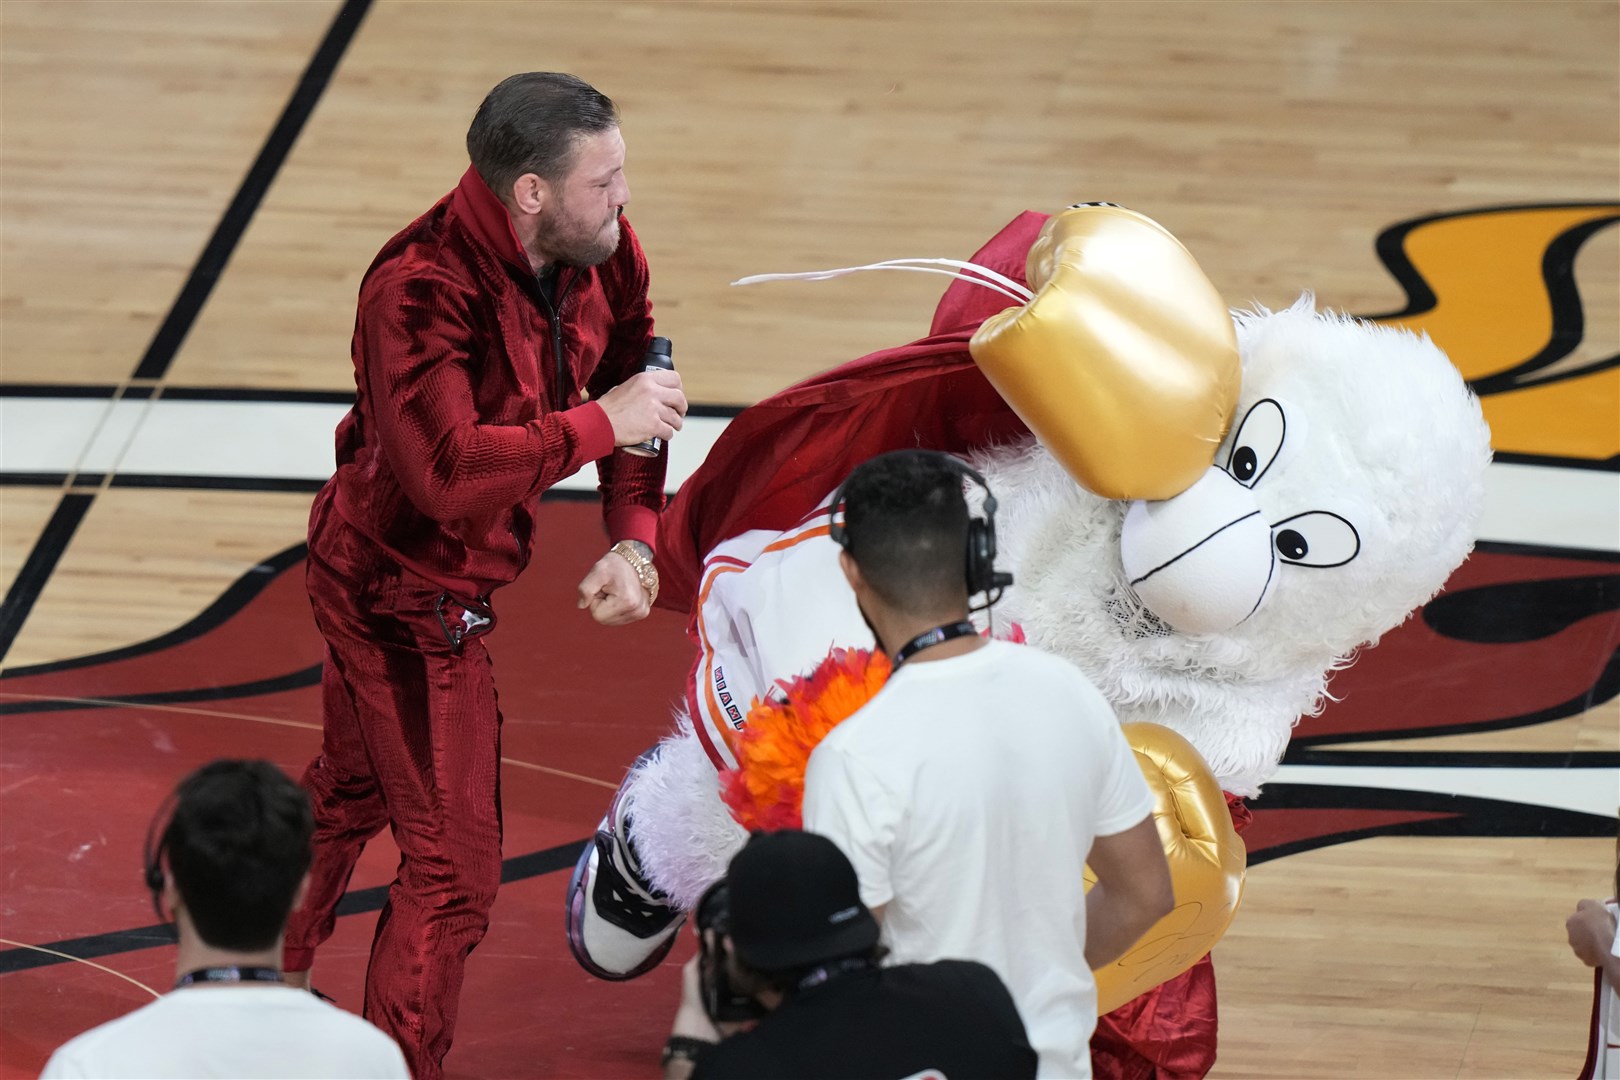 Former MMA fighter Conor McGregor punches Burnie, the Miami Heat mascot, during a break in Game 4 of the NBA Finals against the Denver Nuggets (Lynne Sladky/AP)